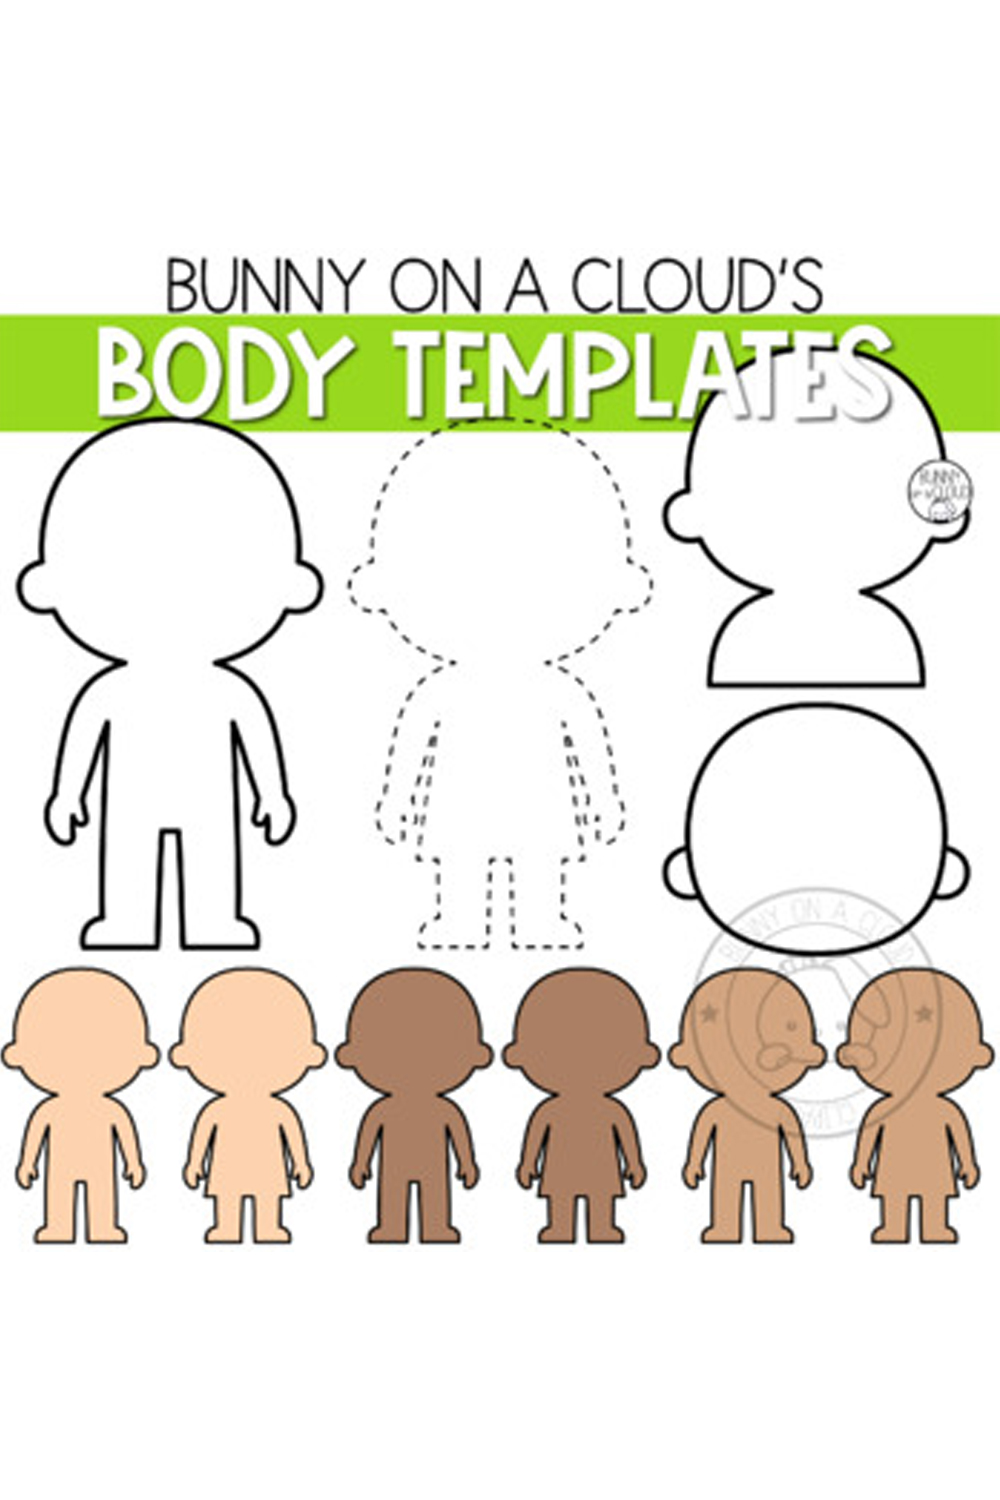 Kids Body Templates Clipart by Bunny On A Cloud pinterest preview image.